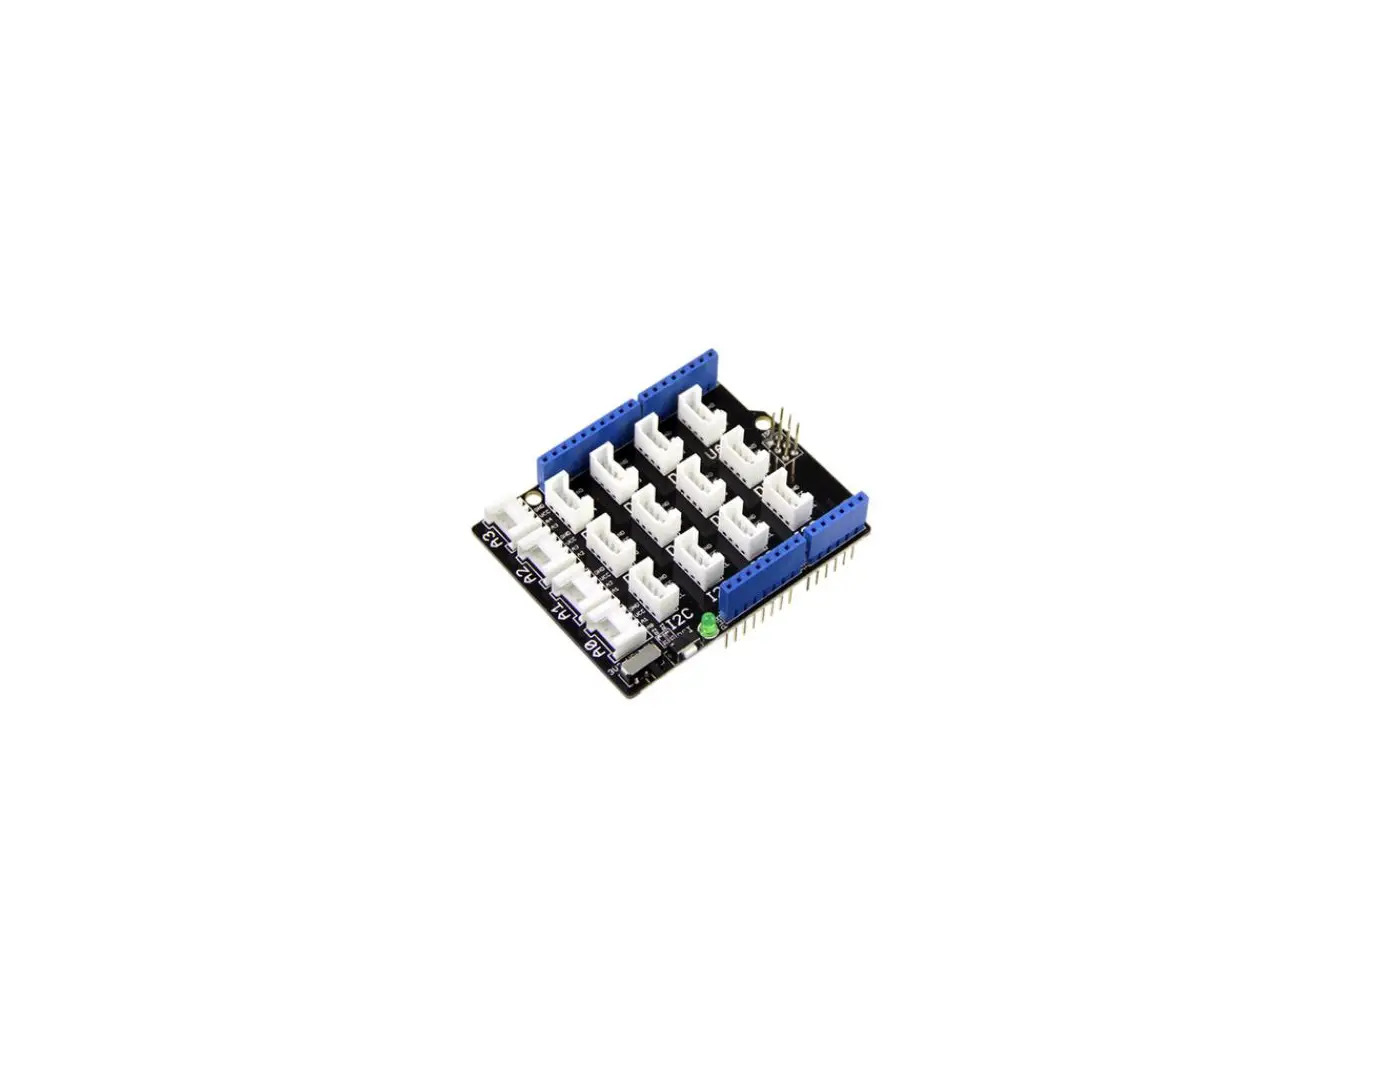 Order Seeed Studio GrovePi Expansion Board